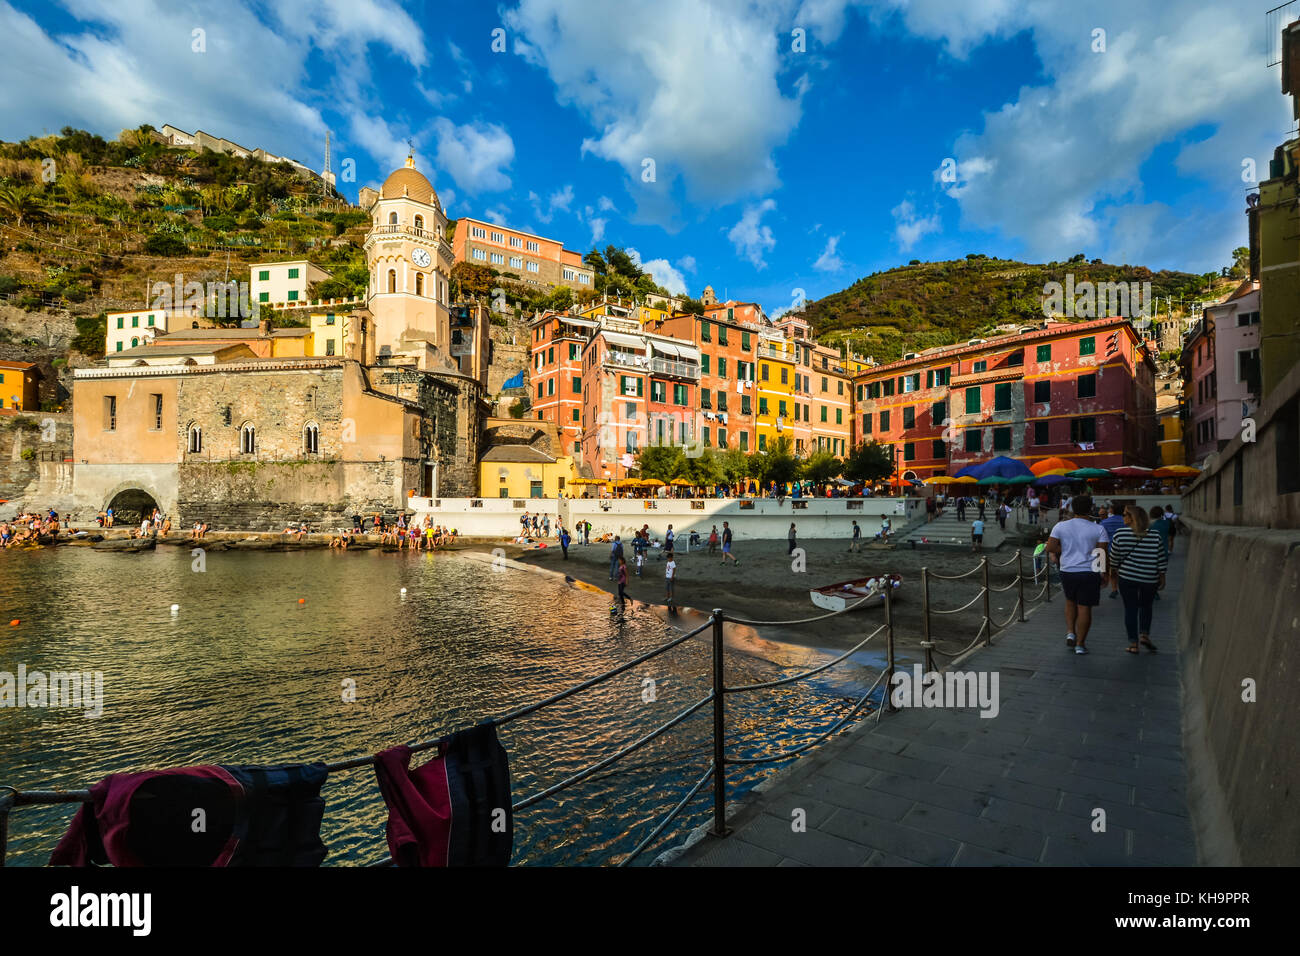 Late afternoon at the marina and sandy beach in the Cinque Terre village of Vernazza, Italy on the Ligurian coast Stock Photo